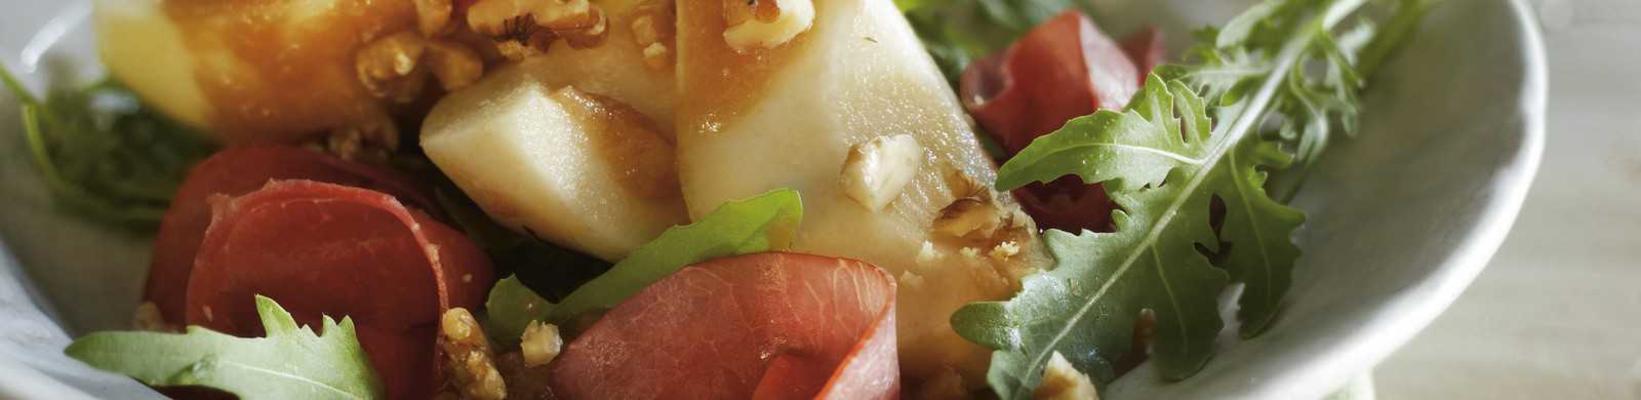 pear on smoked meat with pear-nut dressing